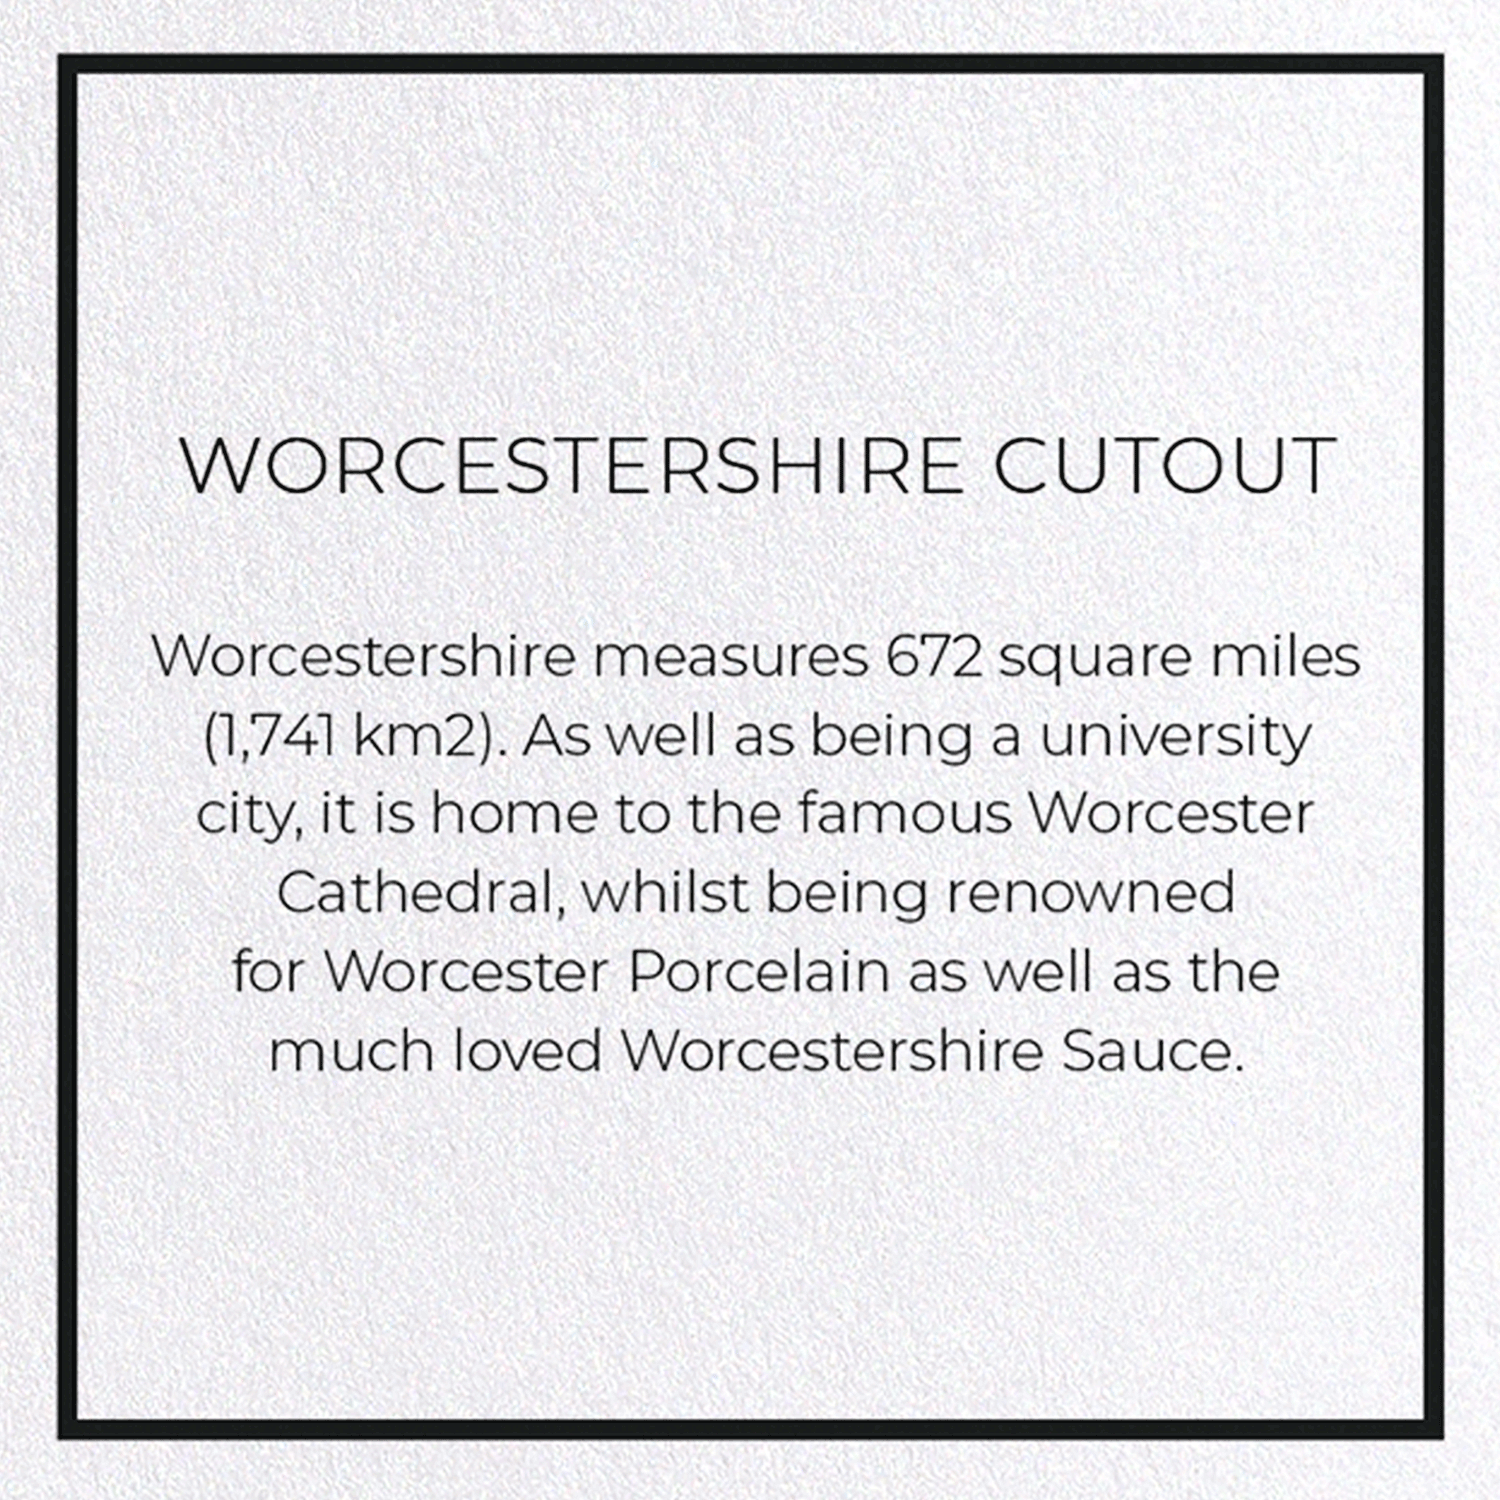 WORCESTERSHIRE CUTOUT: Map Cutout Greeting Card